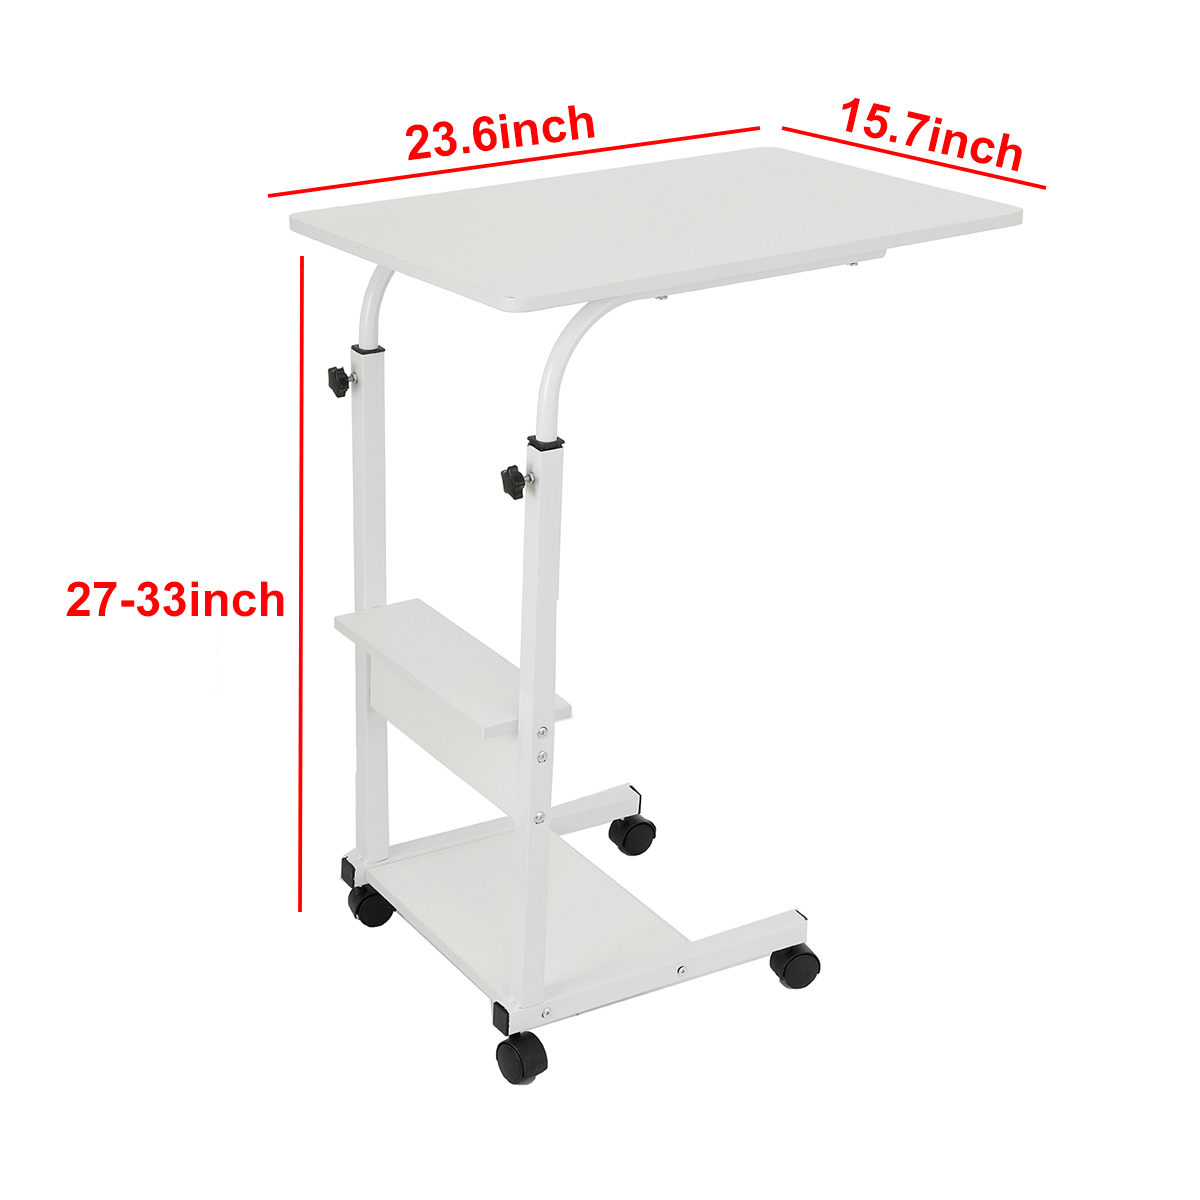 Movable-Laptop-Desk-Adjustable-Height-Computer-Notebook-Desk-Writing-Study-Table-Bedside-Tray-with-2-1750182-5